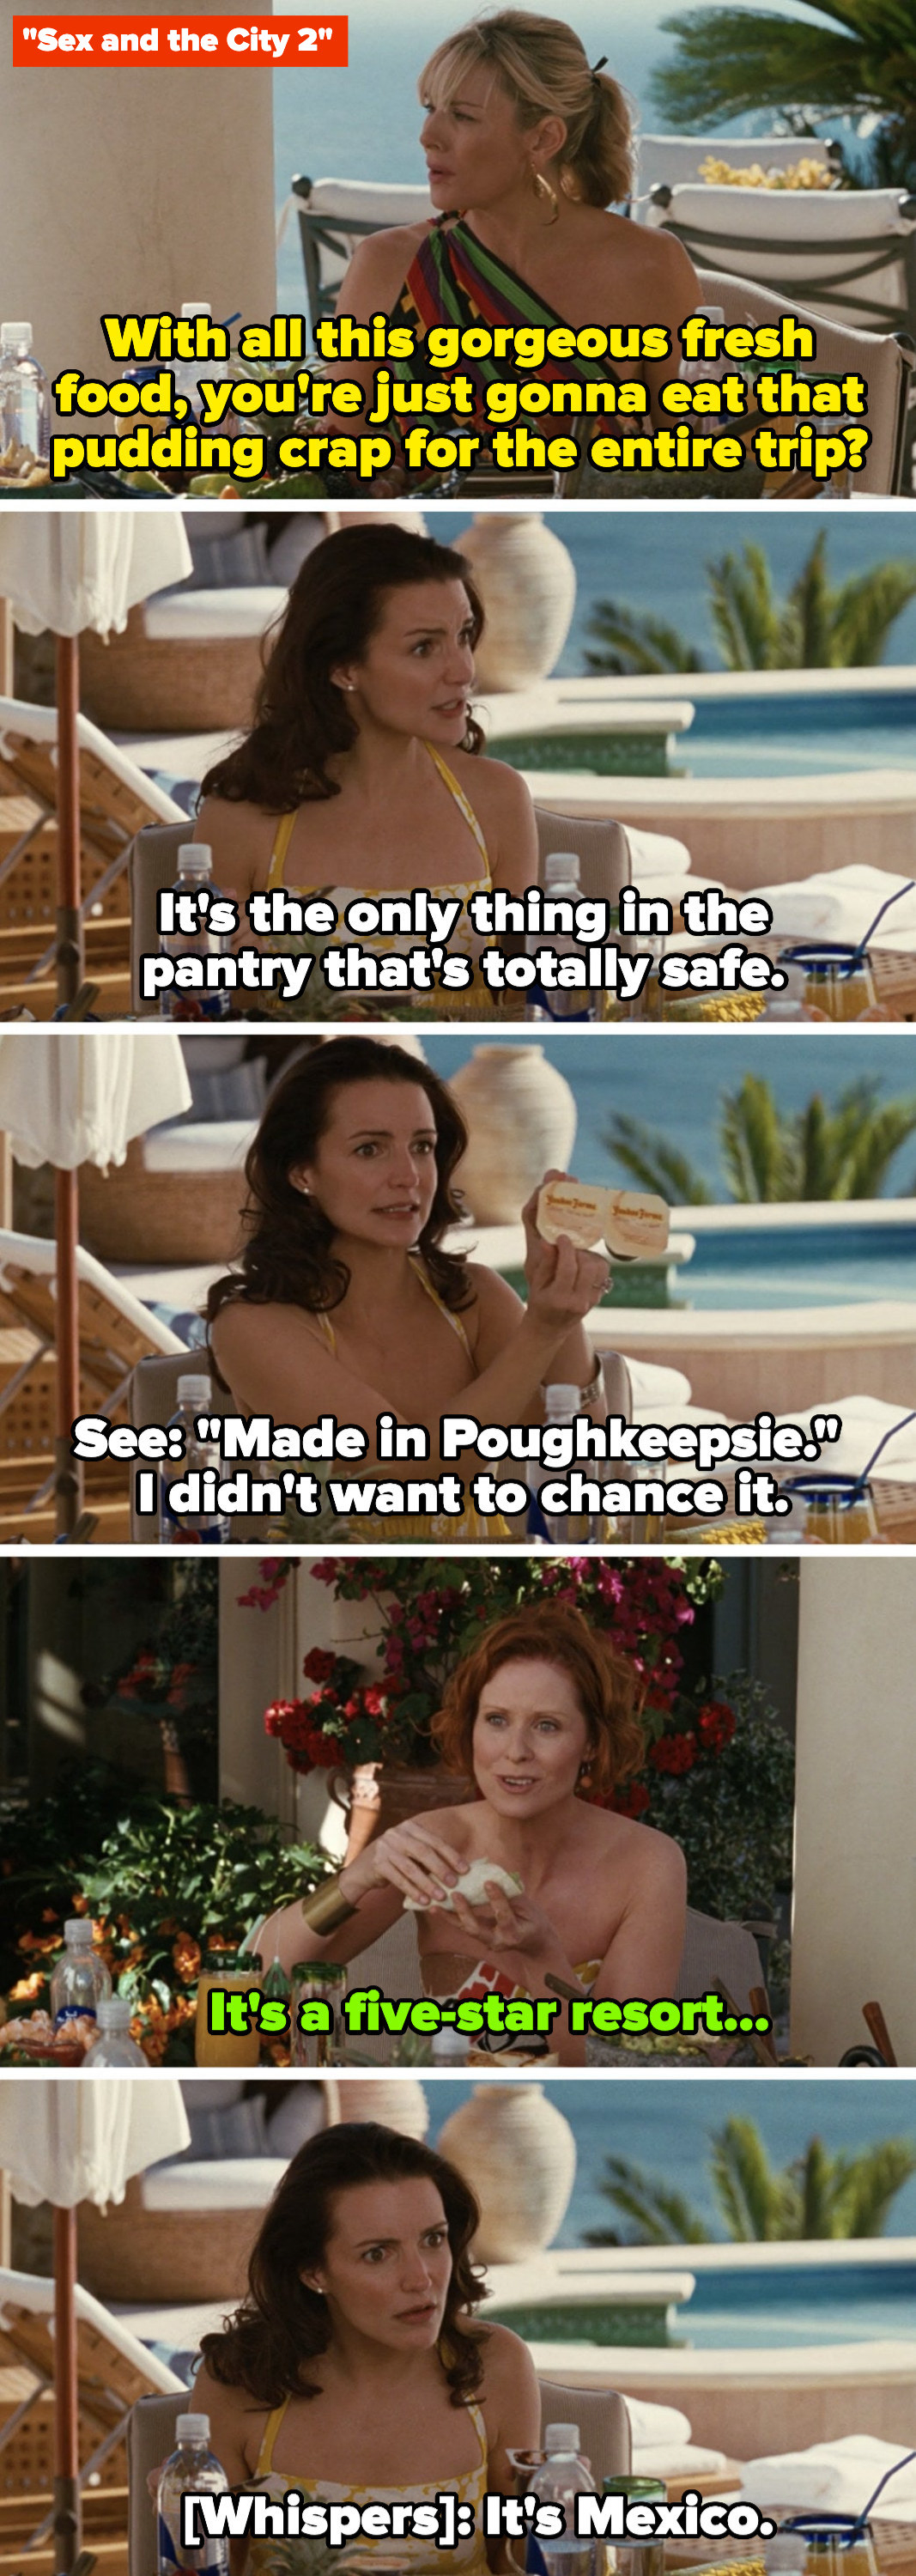 Samantha: &quot;You&#x27;re going to eat this pudding crap on the entire trip?&quot; Charlotte: &quot;It&#x27;s the only thing in the pantry that&#x27;s safe.&quot; Miranda: &quot;It&#x27;s a five-star resort...&quot; Charlotte: &quot;It&#x27;s Mexico&quot;